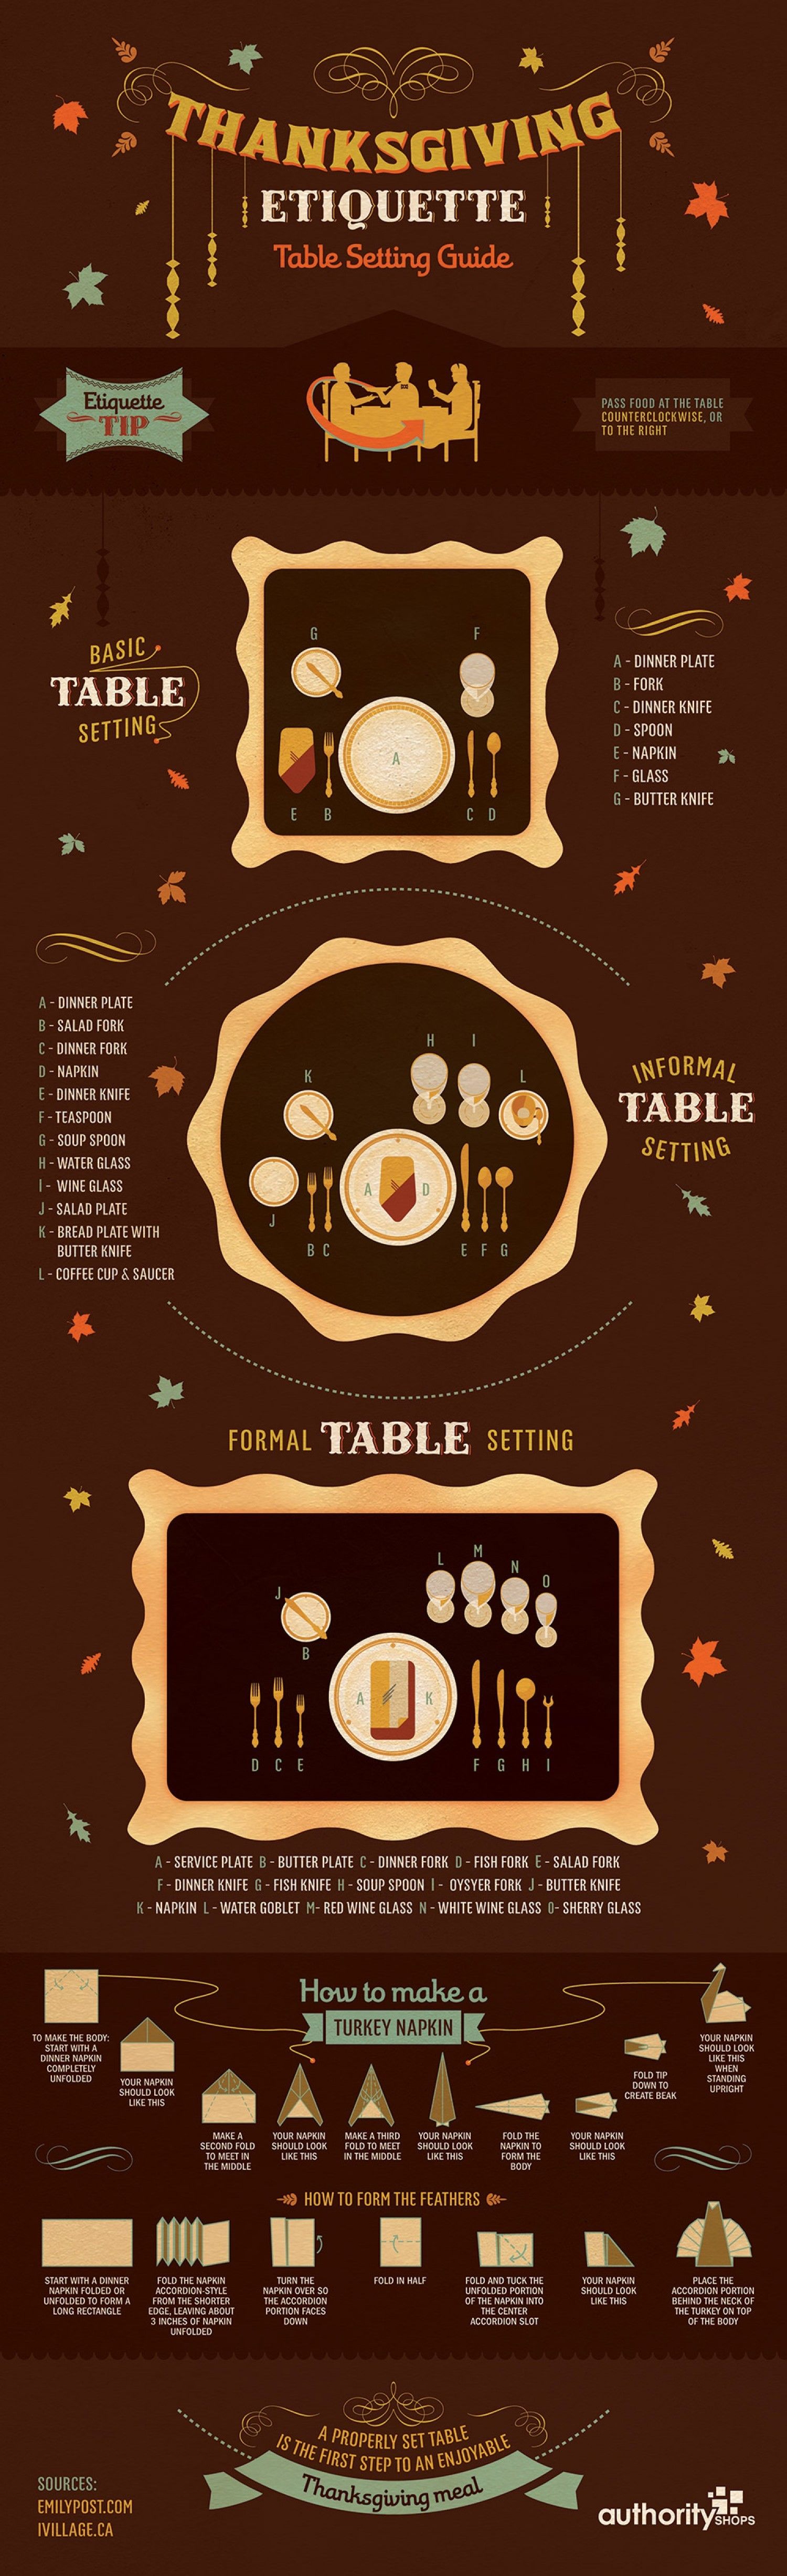 Thanksgiving Table Setting Guide Infographic